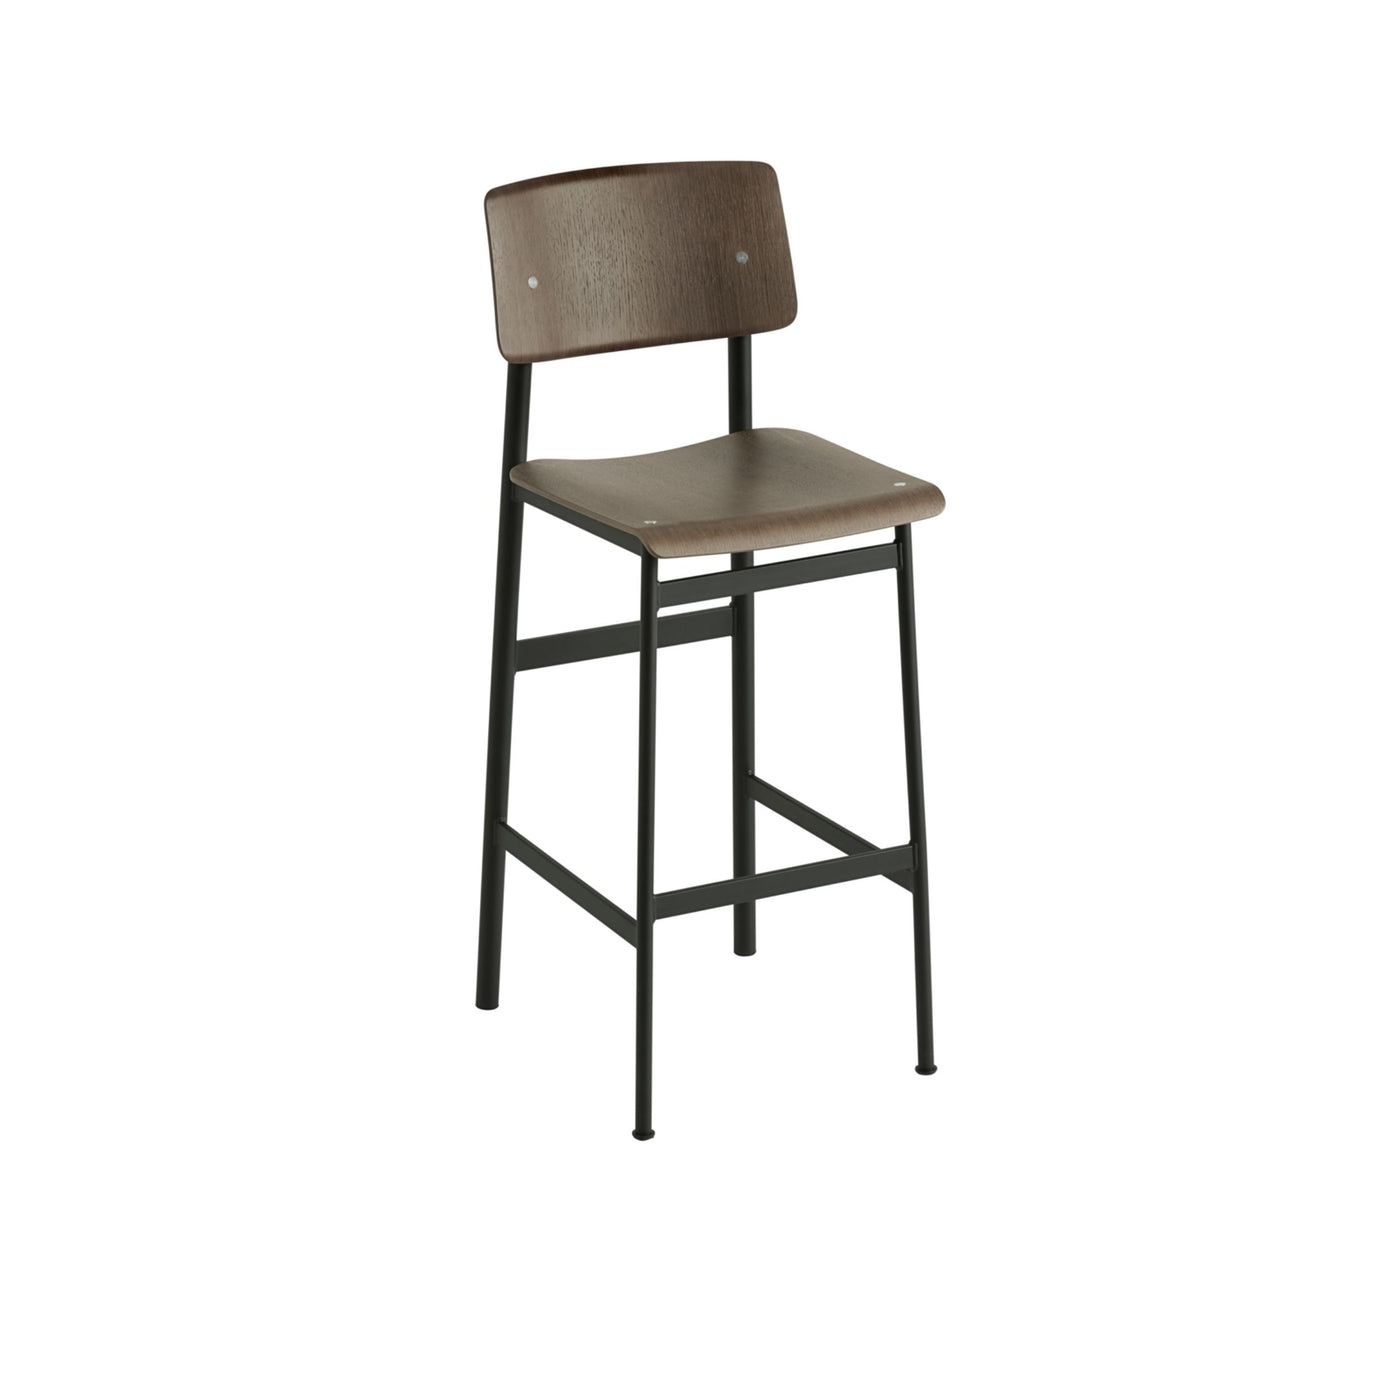 Muuto Loft Bar Stool 75cm. Shop online at someday designs. #colour_stained-dark-brown-black